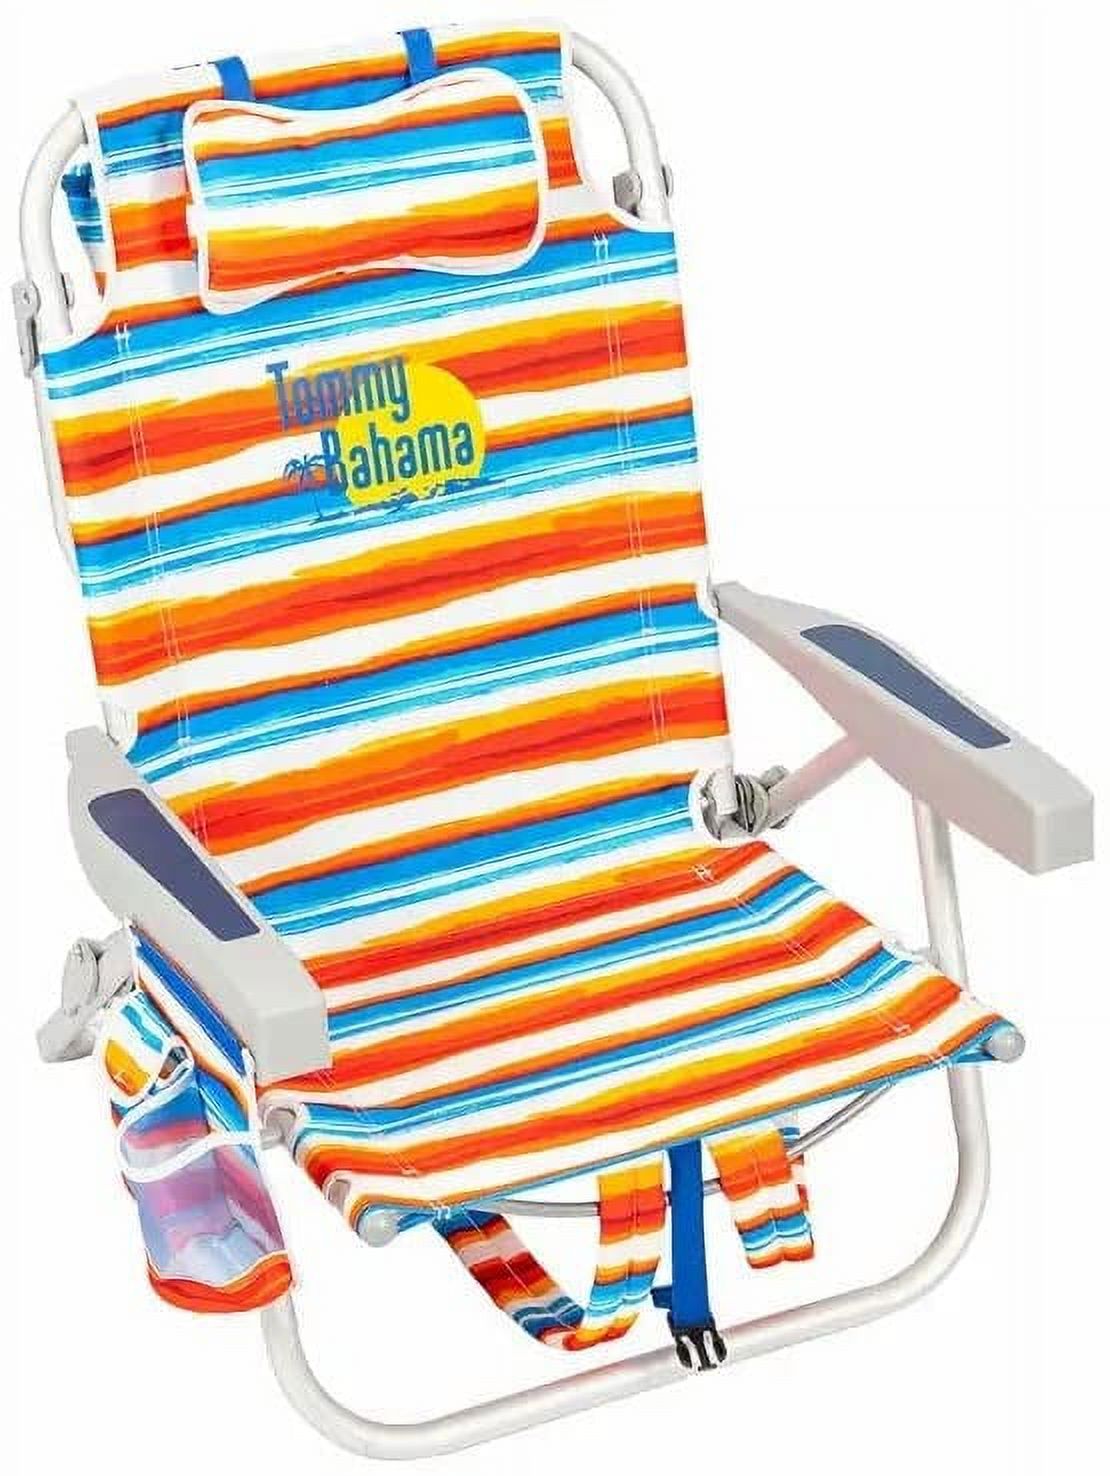 2022 Tommy Bahama 5 Position Tropical Sunset Backpack Beach Chair - image 1 of 5